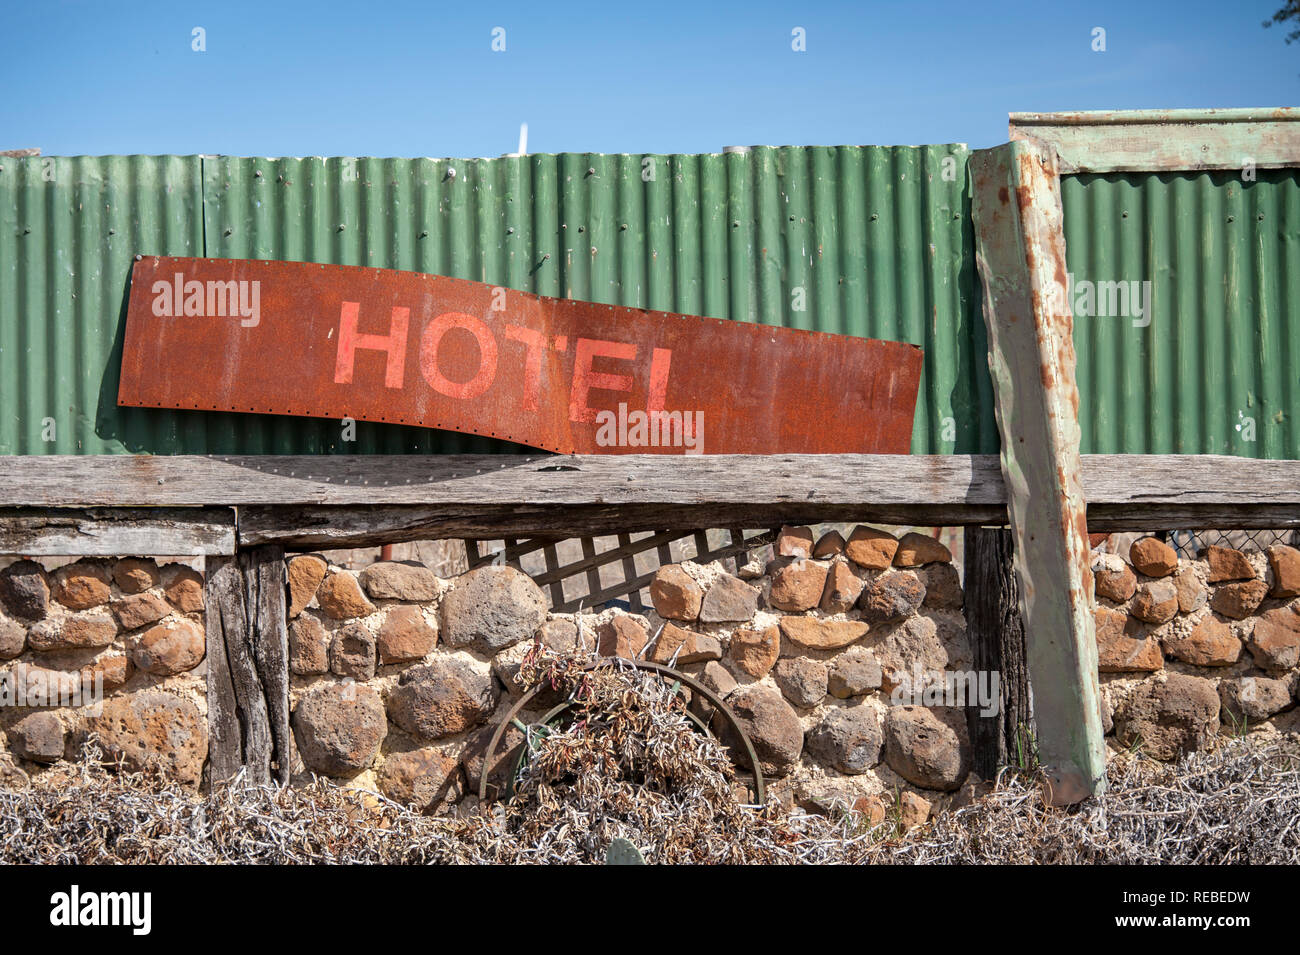 Old and rusted disused hotel sign leaning against a green corrugated fence on top of a stone wall Stock Photo